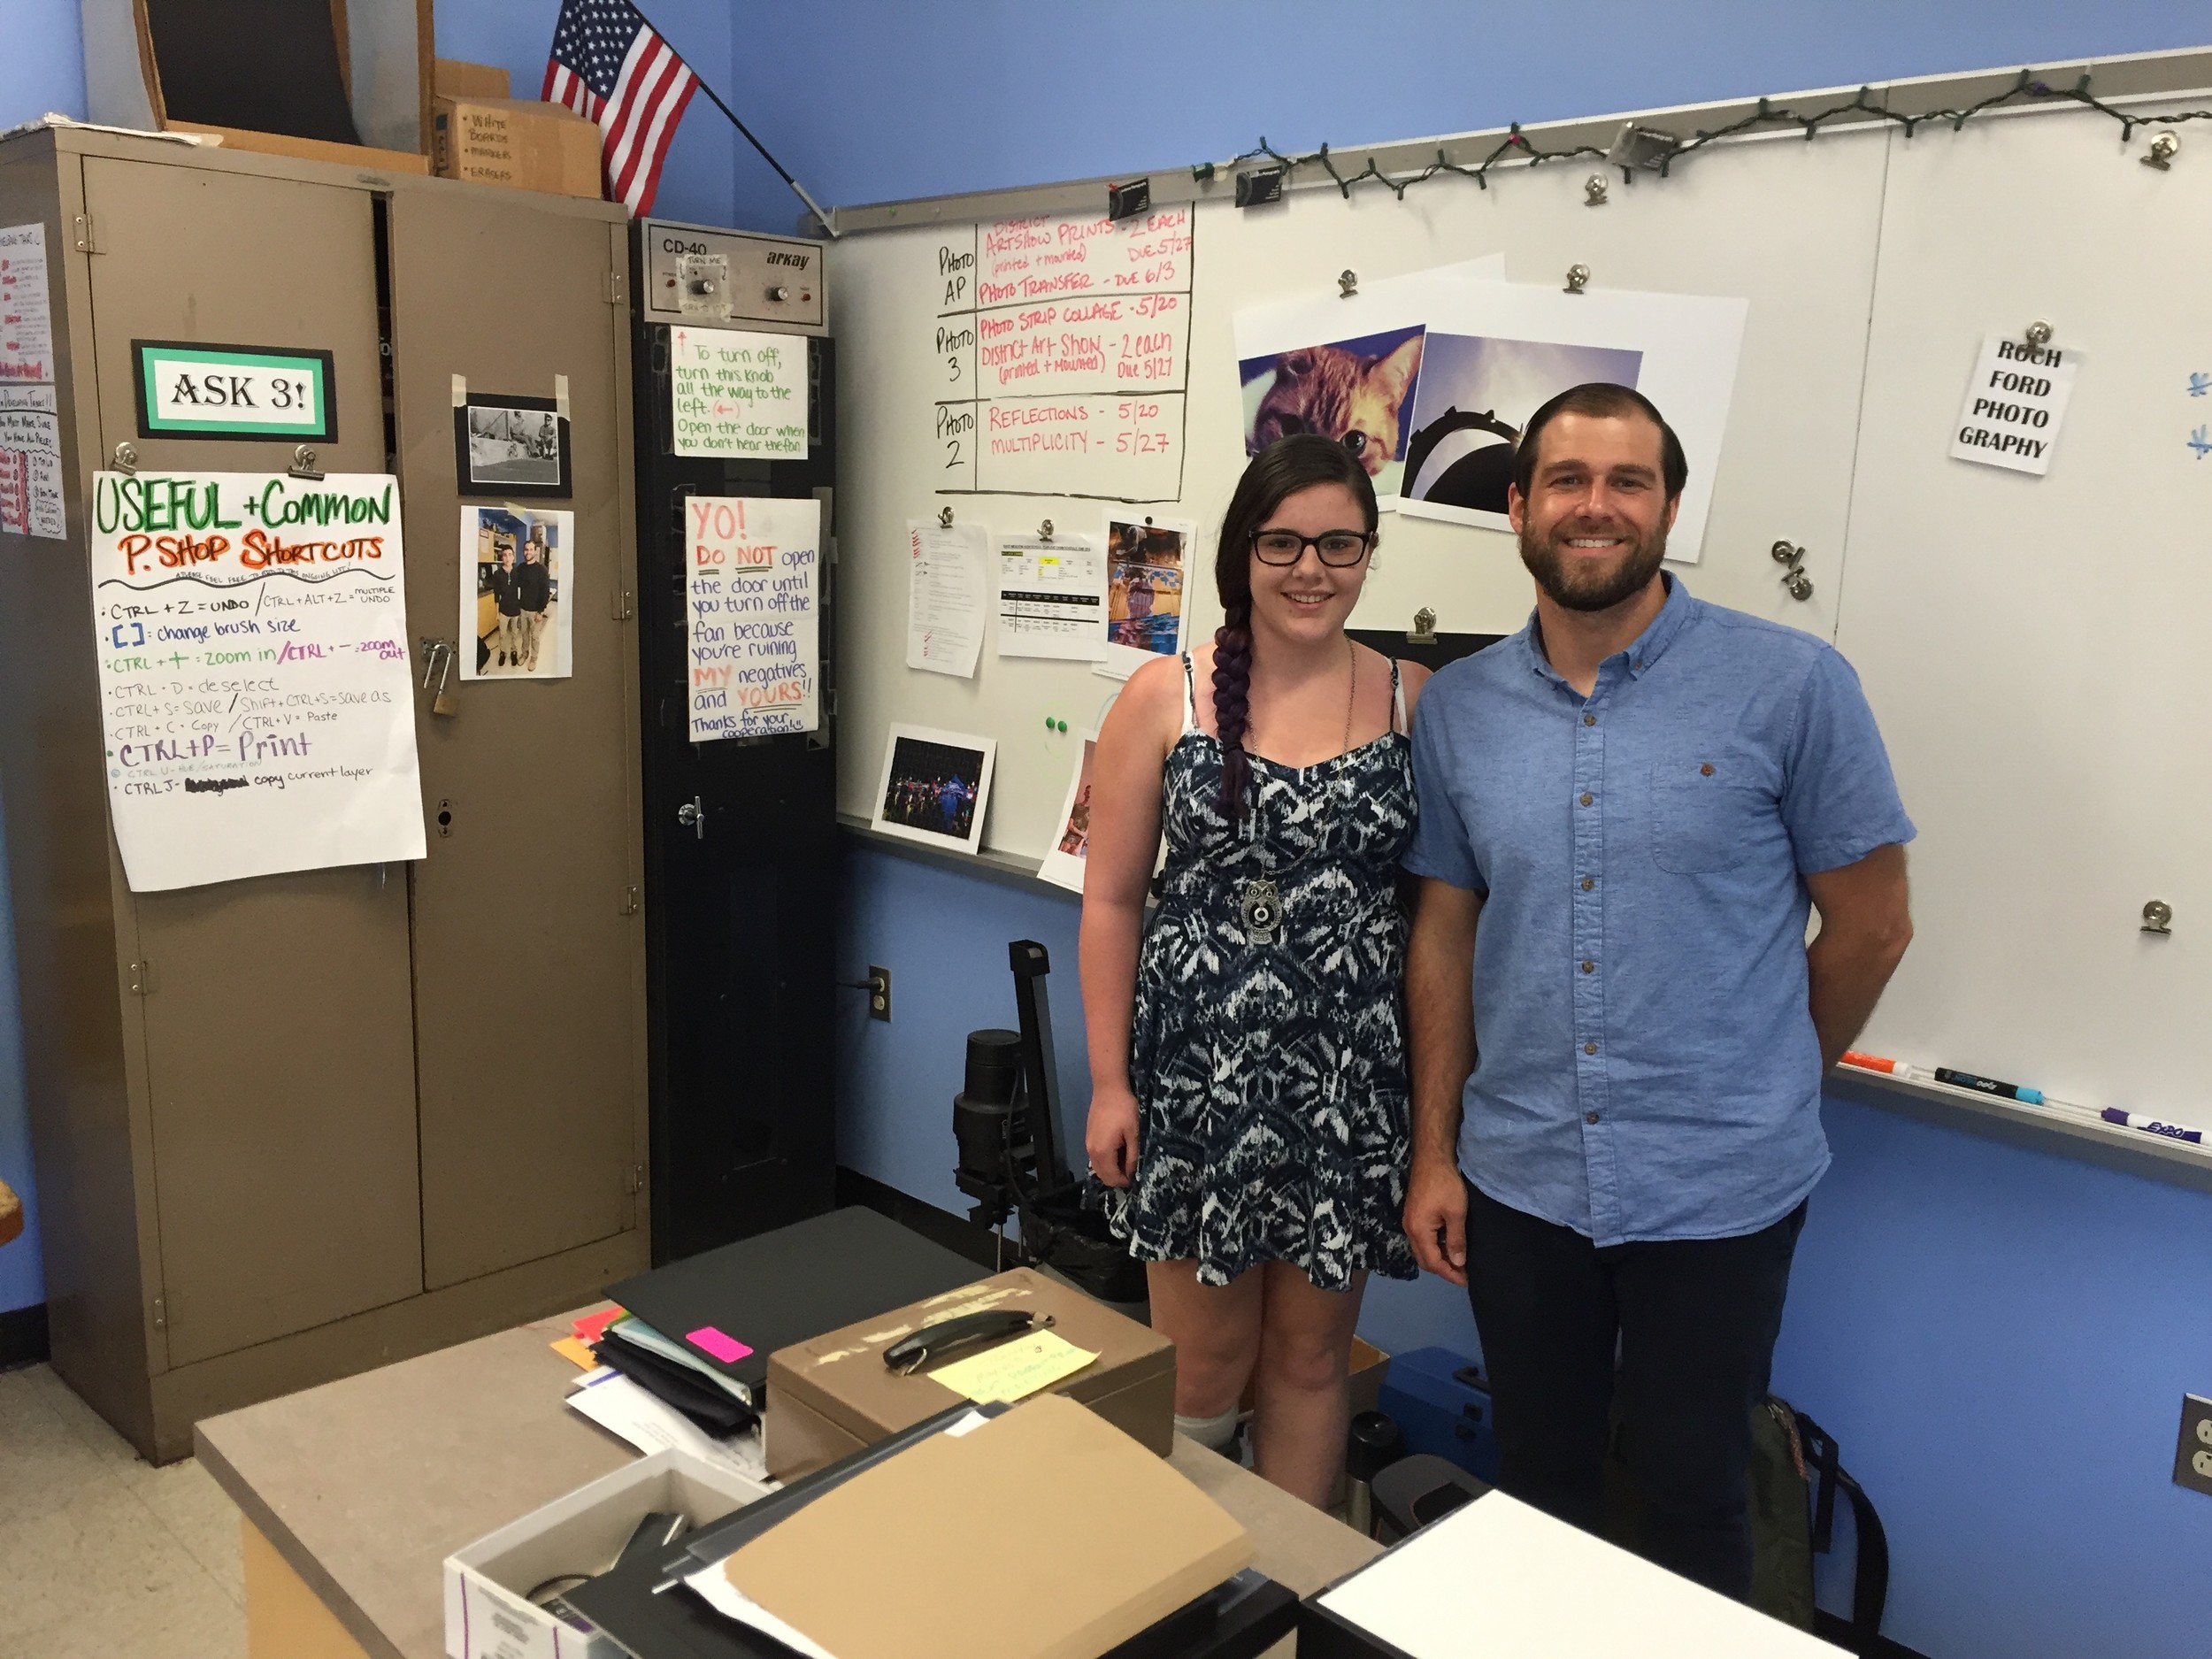 Ryan Rochford, Caitlyn Herlihy's photography teacher at EMHS, praised her work ethic